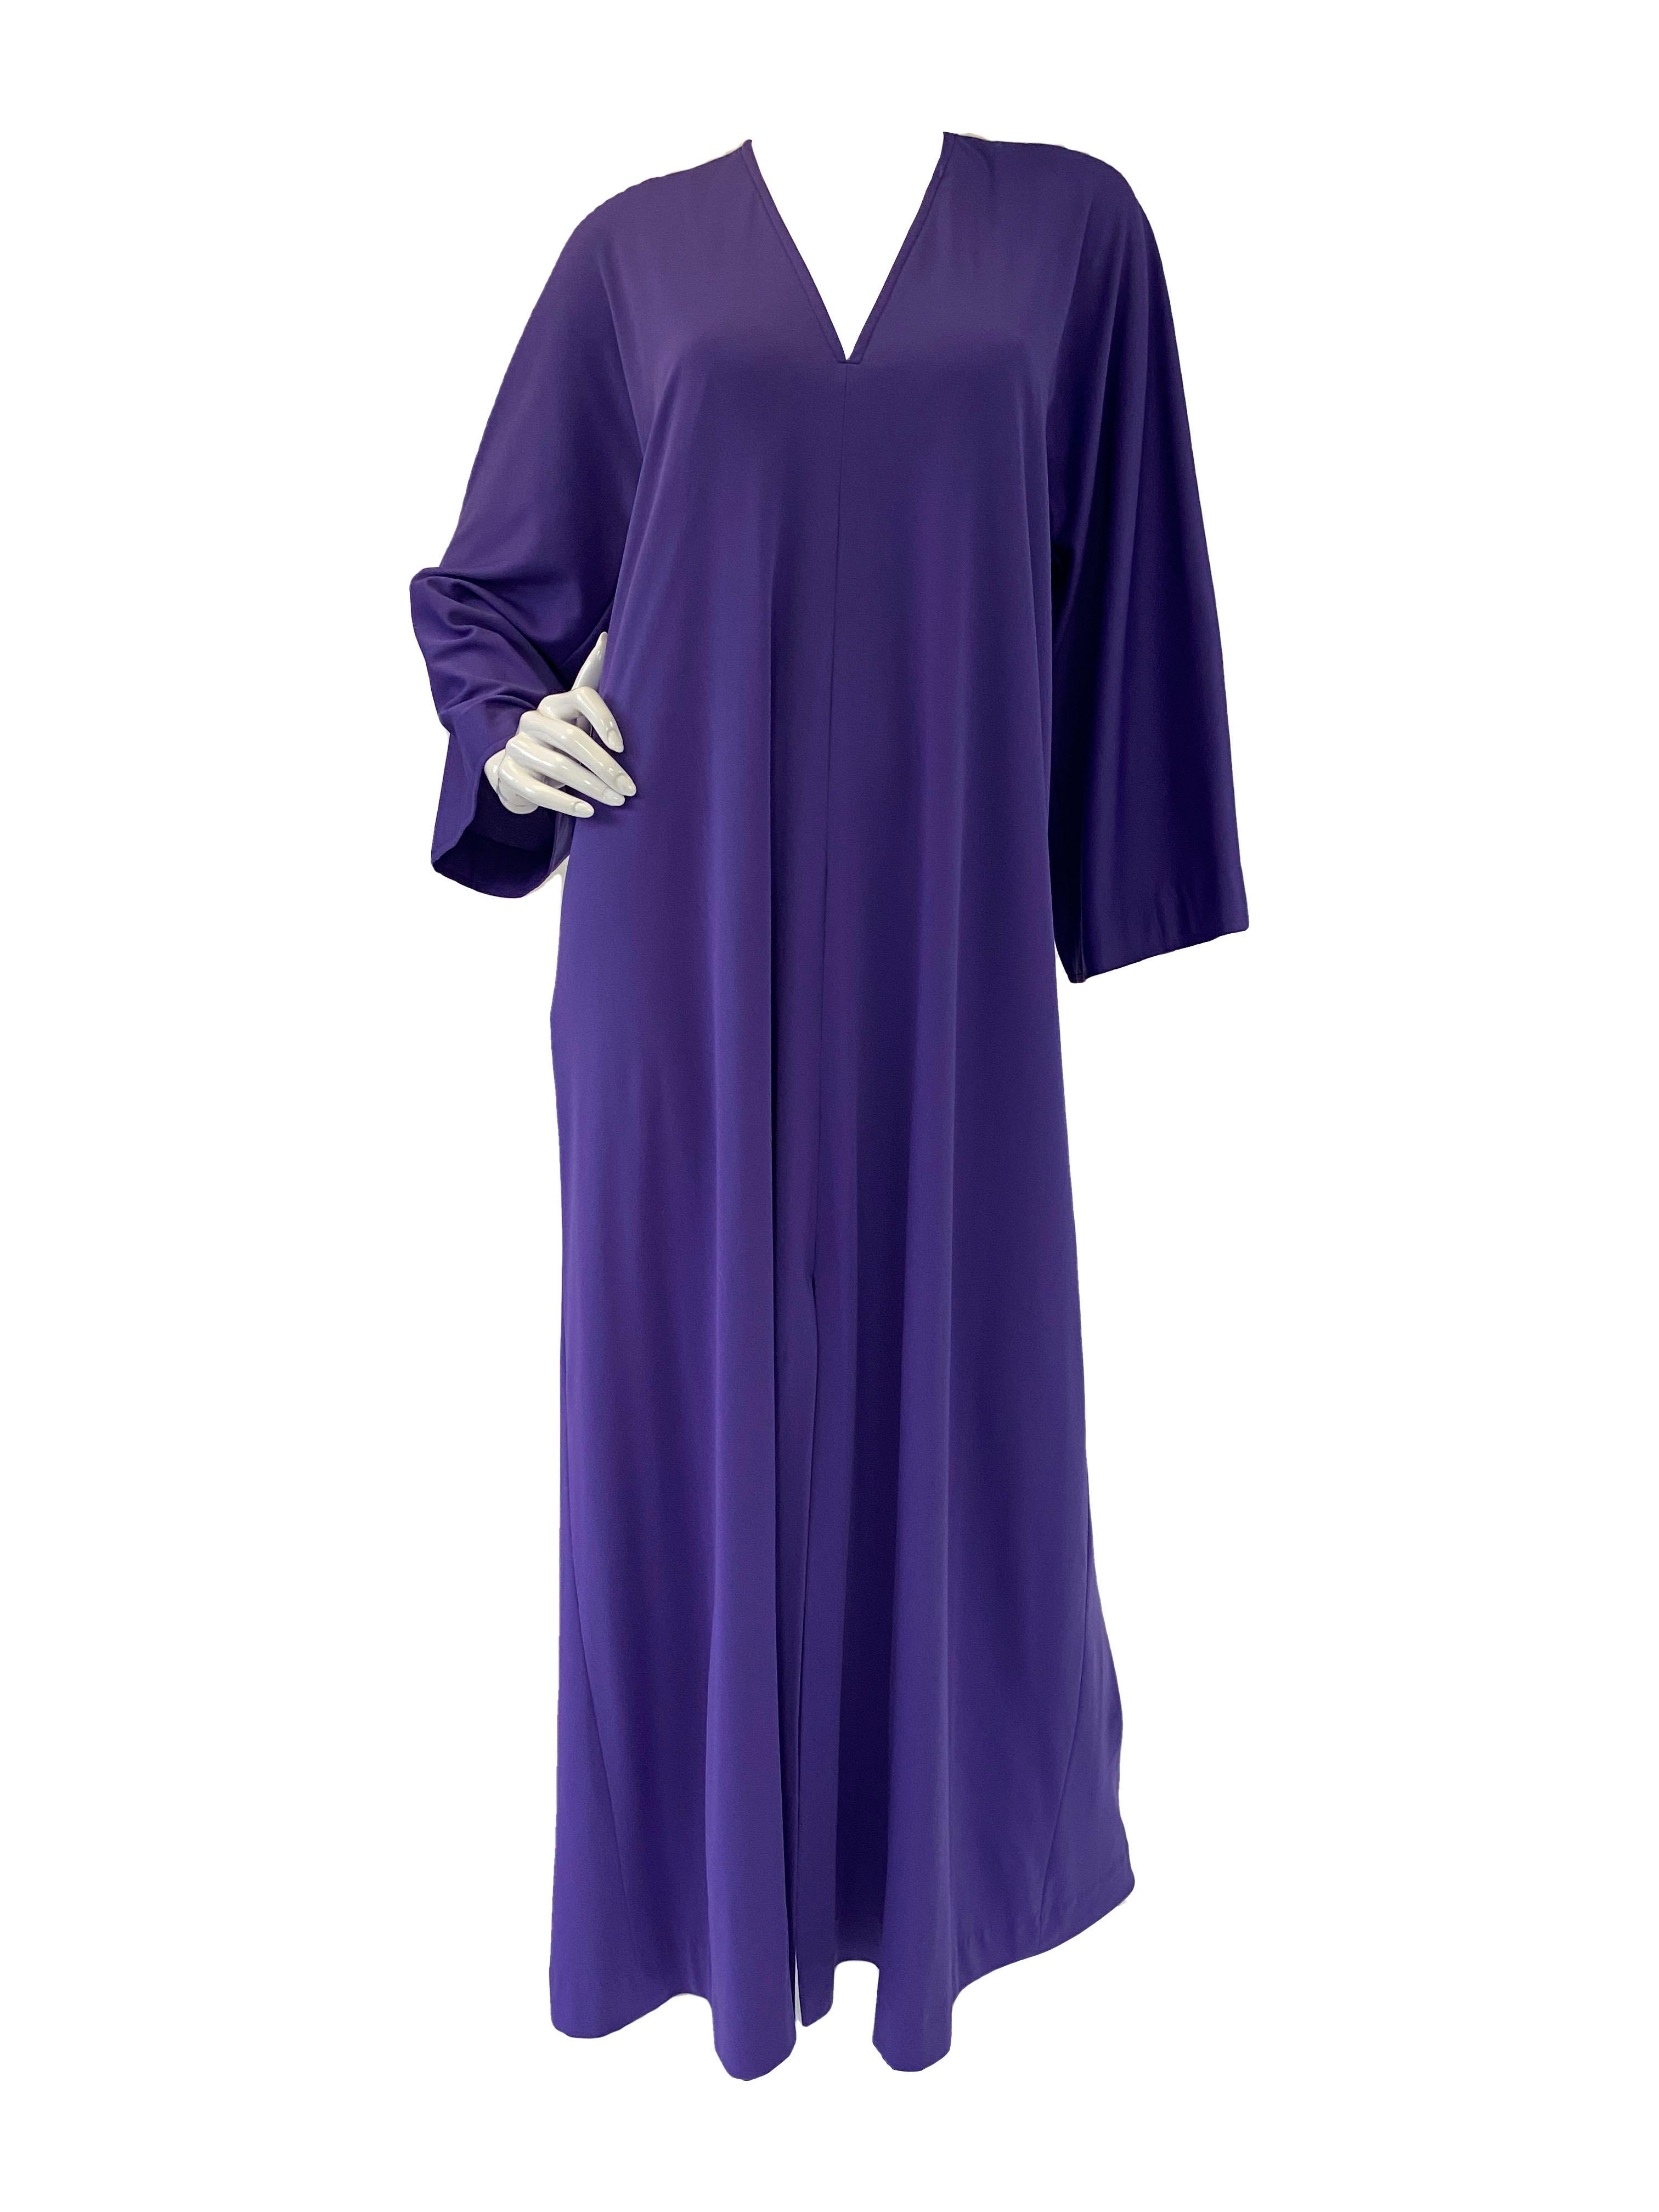 Early 1980s Halston IV Purple Jersey Knit Caftan 

Check out this comfortably stylish purple jersey knit kaftan from Halston IV. 

 The kaftan maintains his iconic minimalist design with its draped easy fit, long sleeves that widen towards the